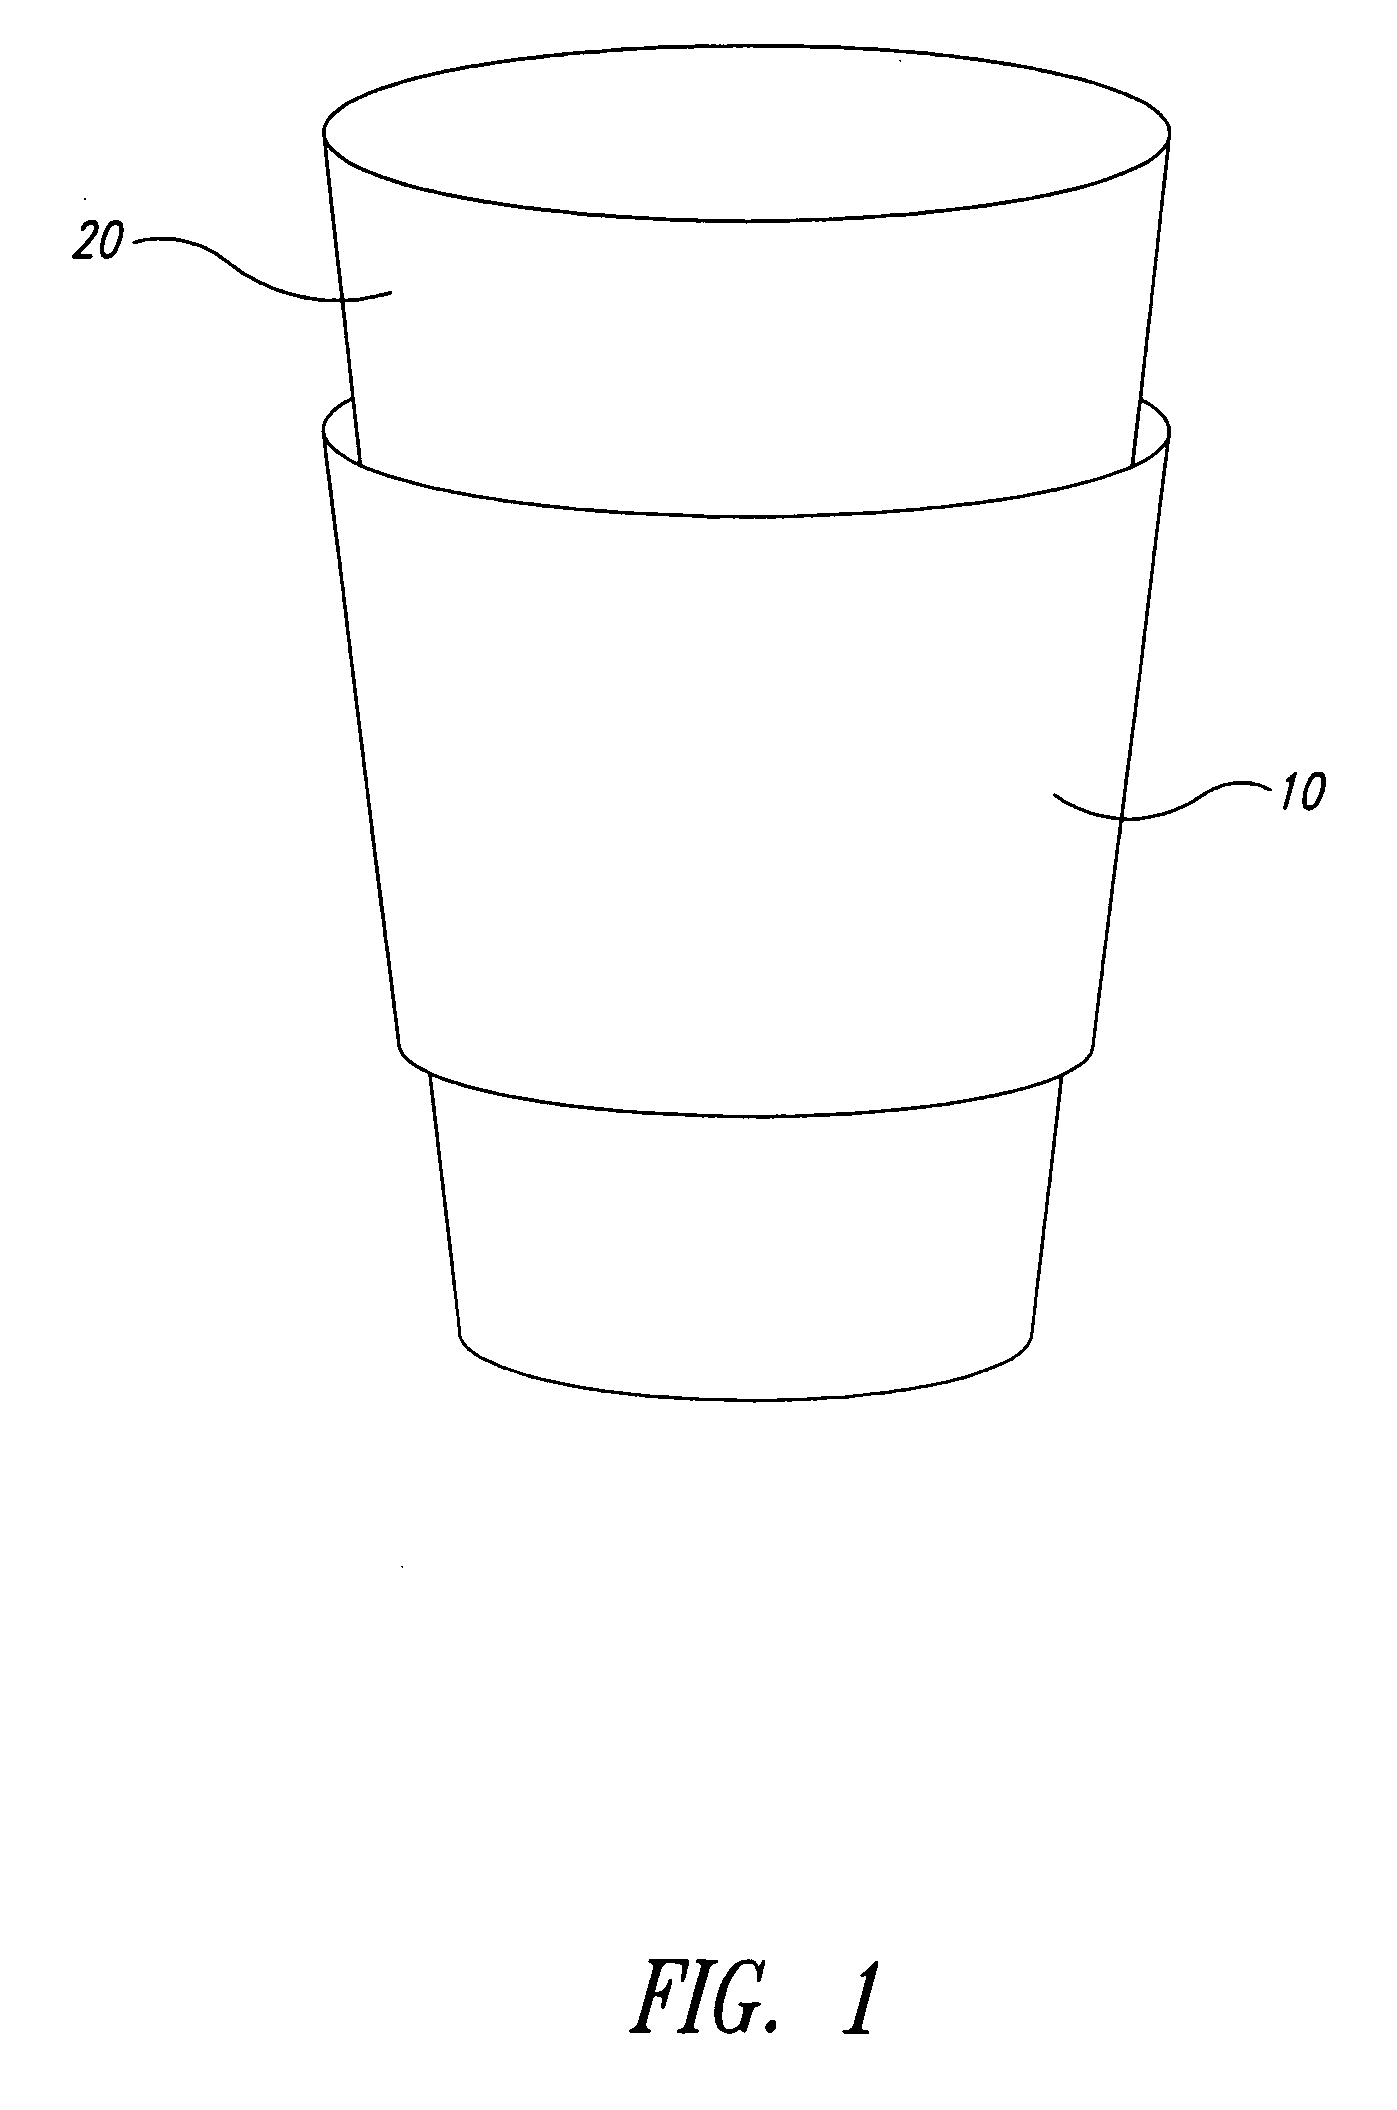 Reusable sleeve for a beverage container